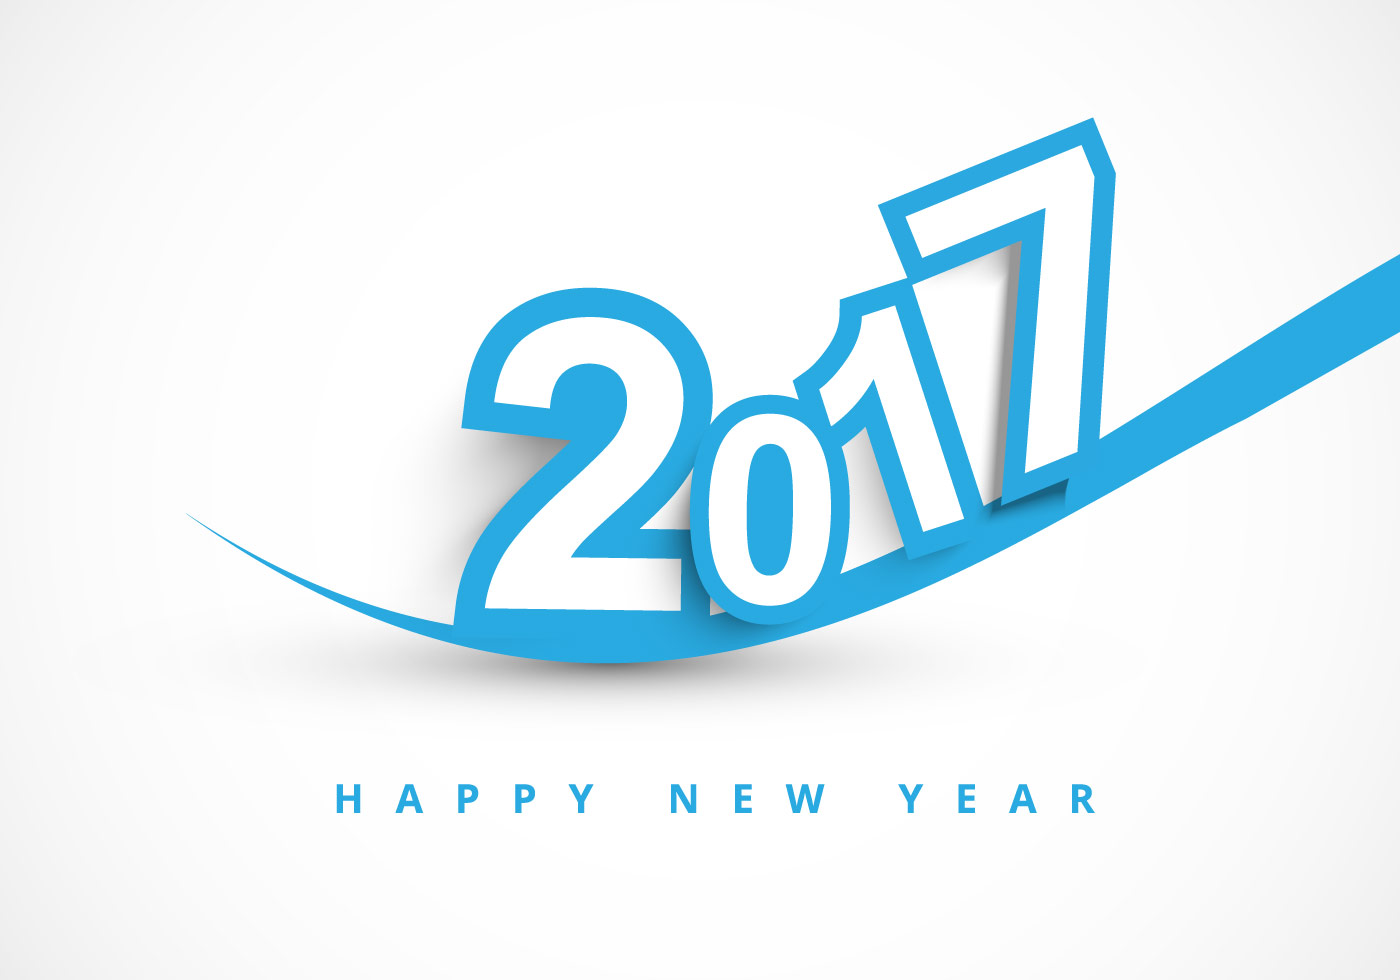 2017-happy-new-year-greeting-card-vector